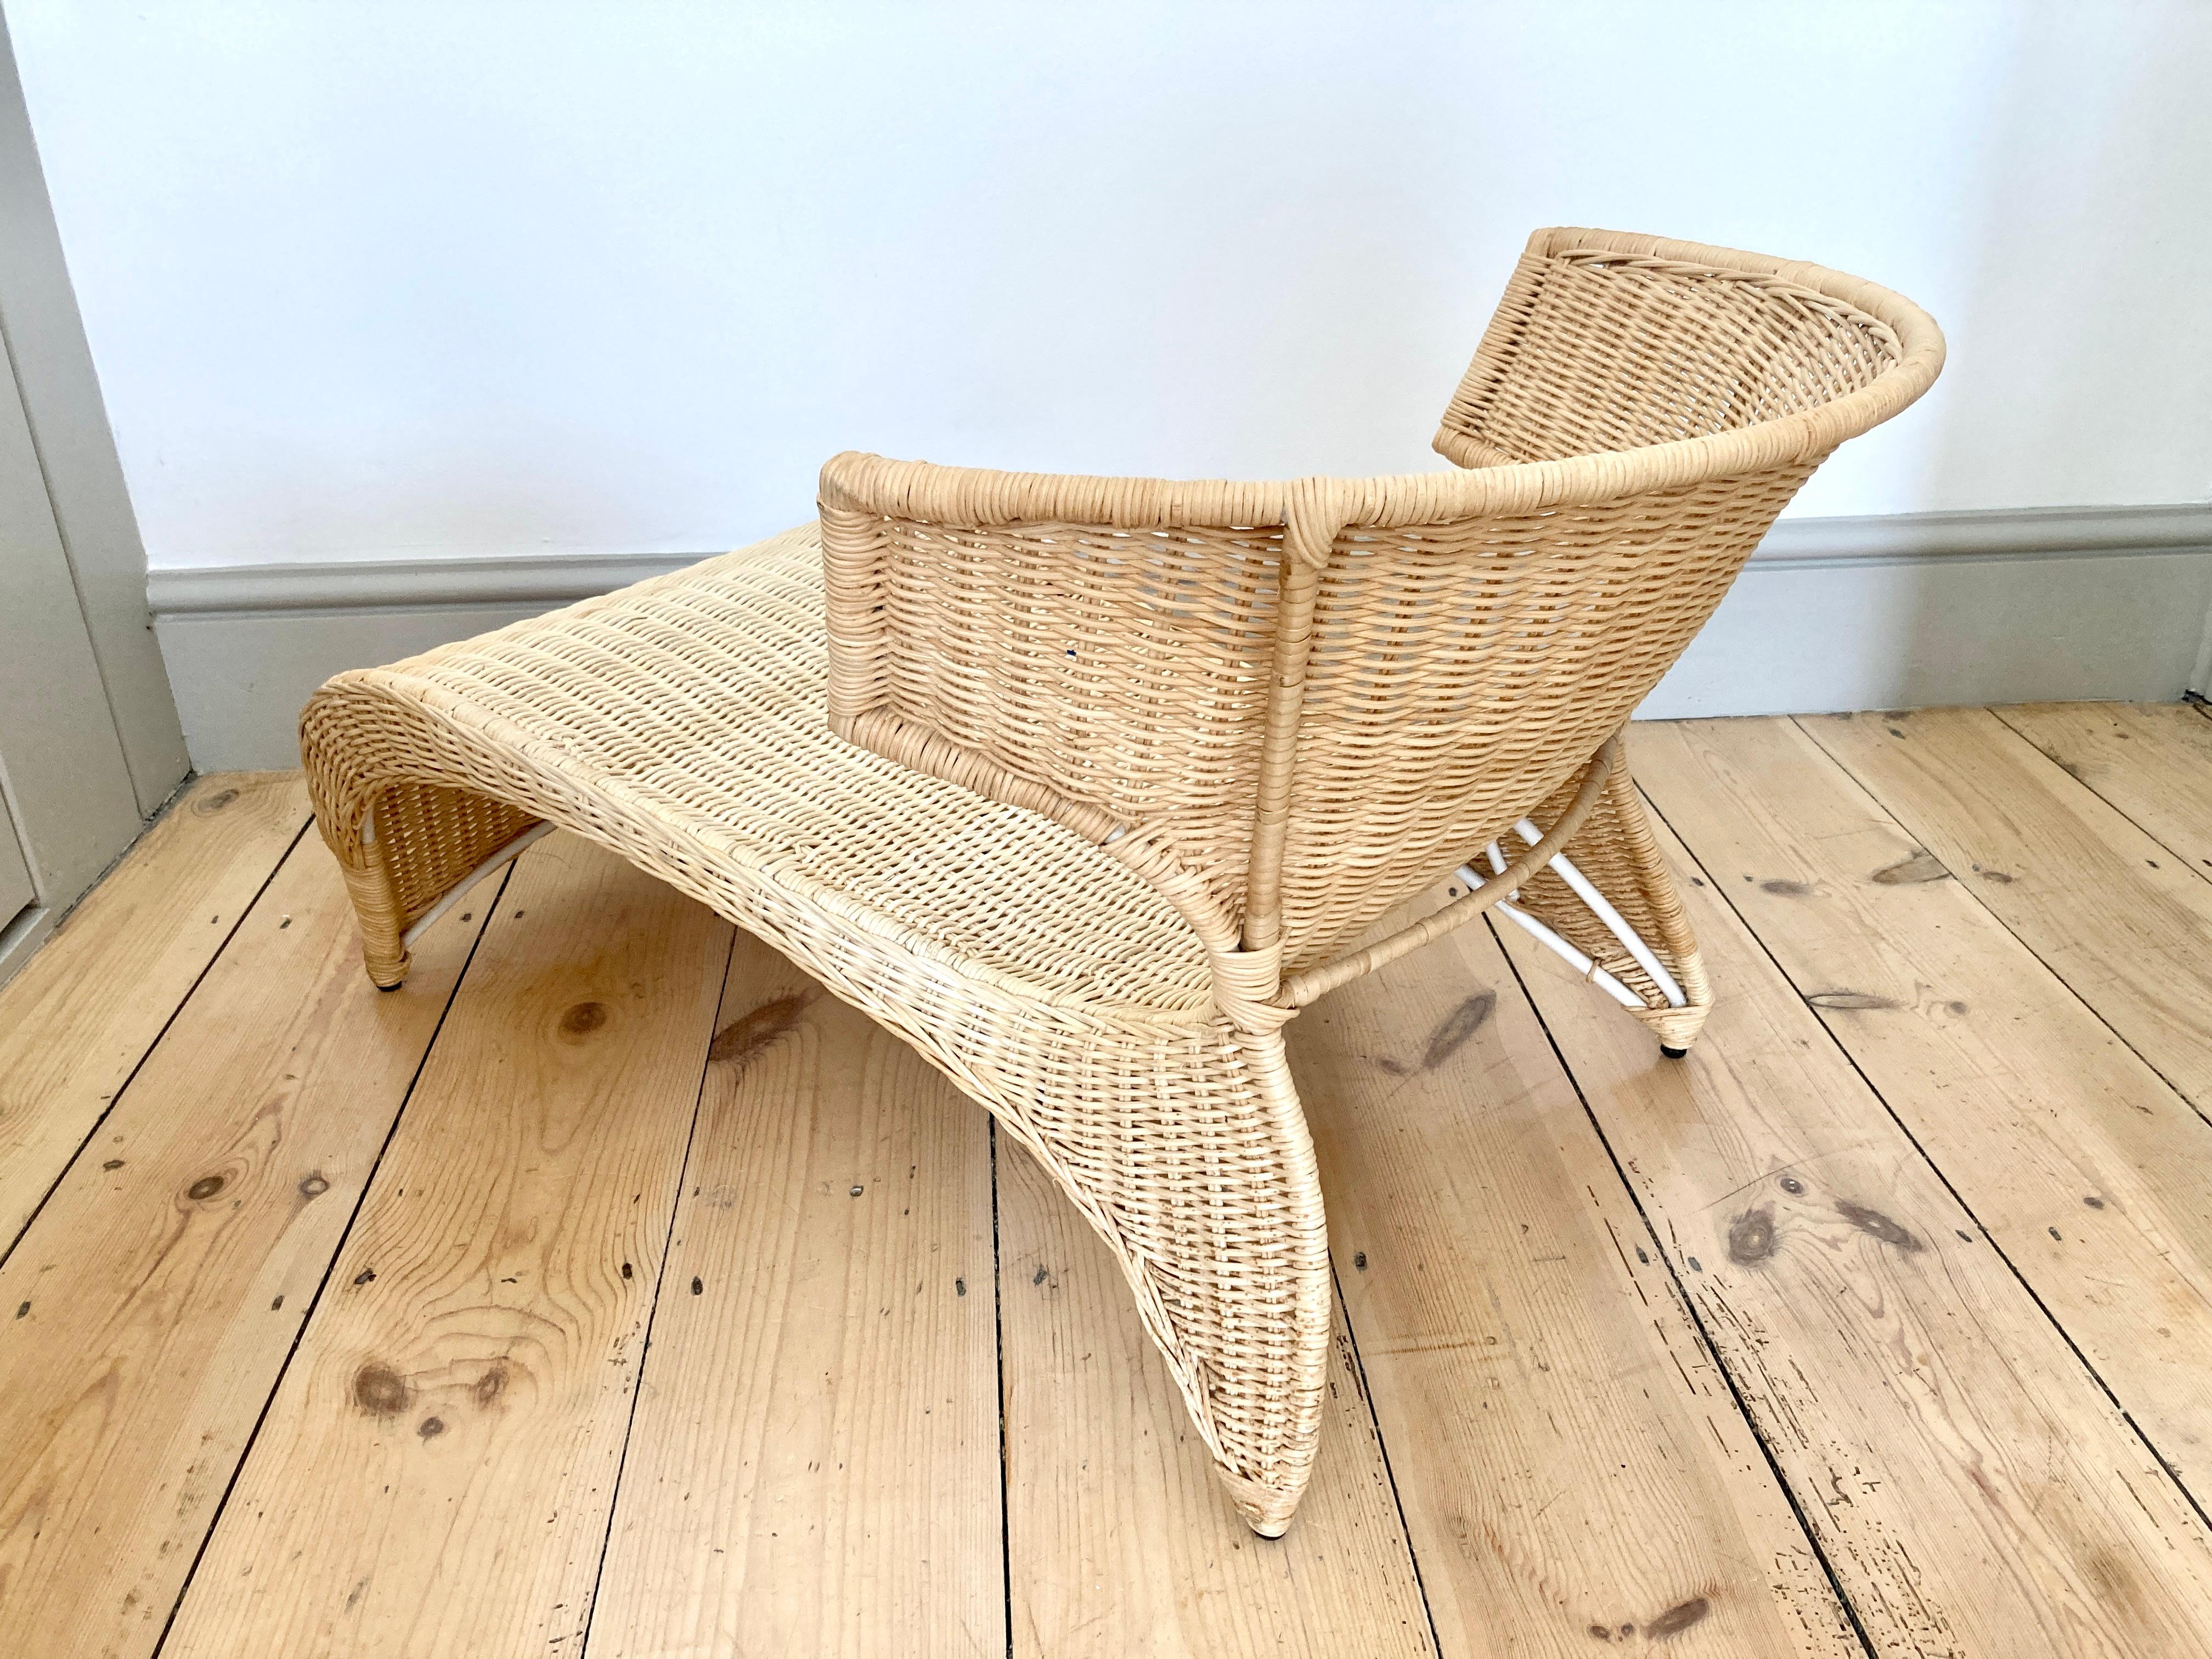 Low Lounge Chair / Chaise Longue by Monika Mulder for Ikea Savo Natural Rattan 8